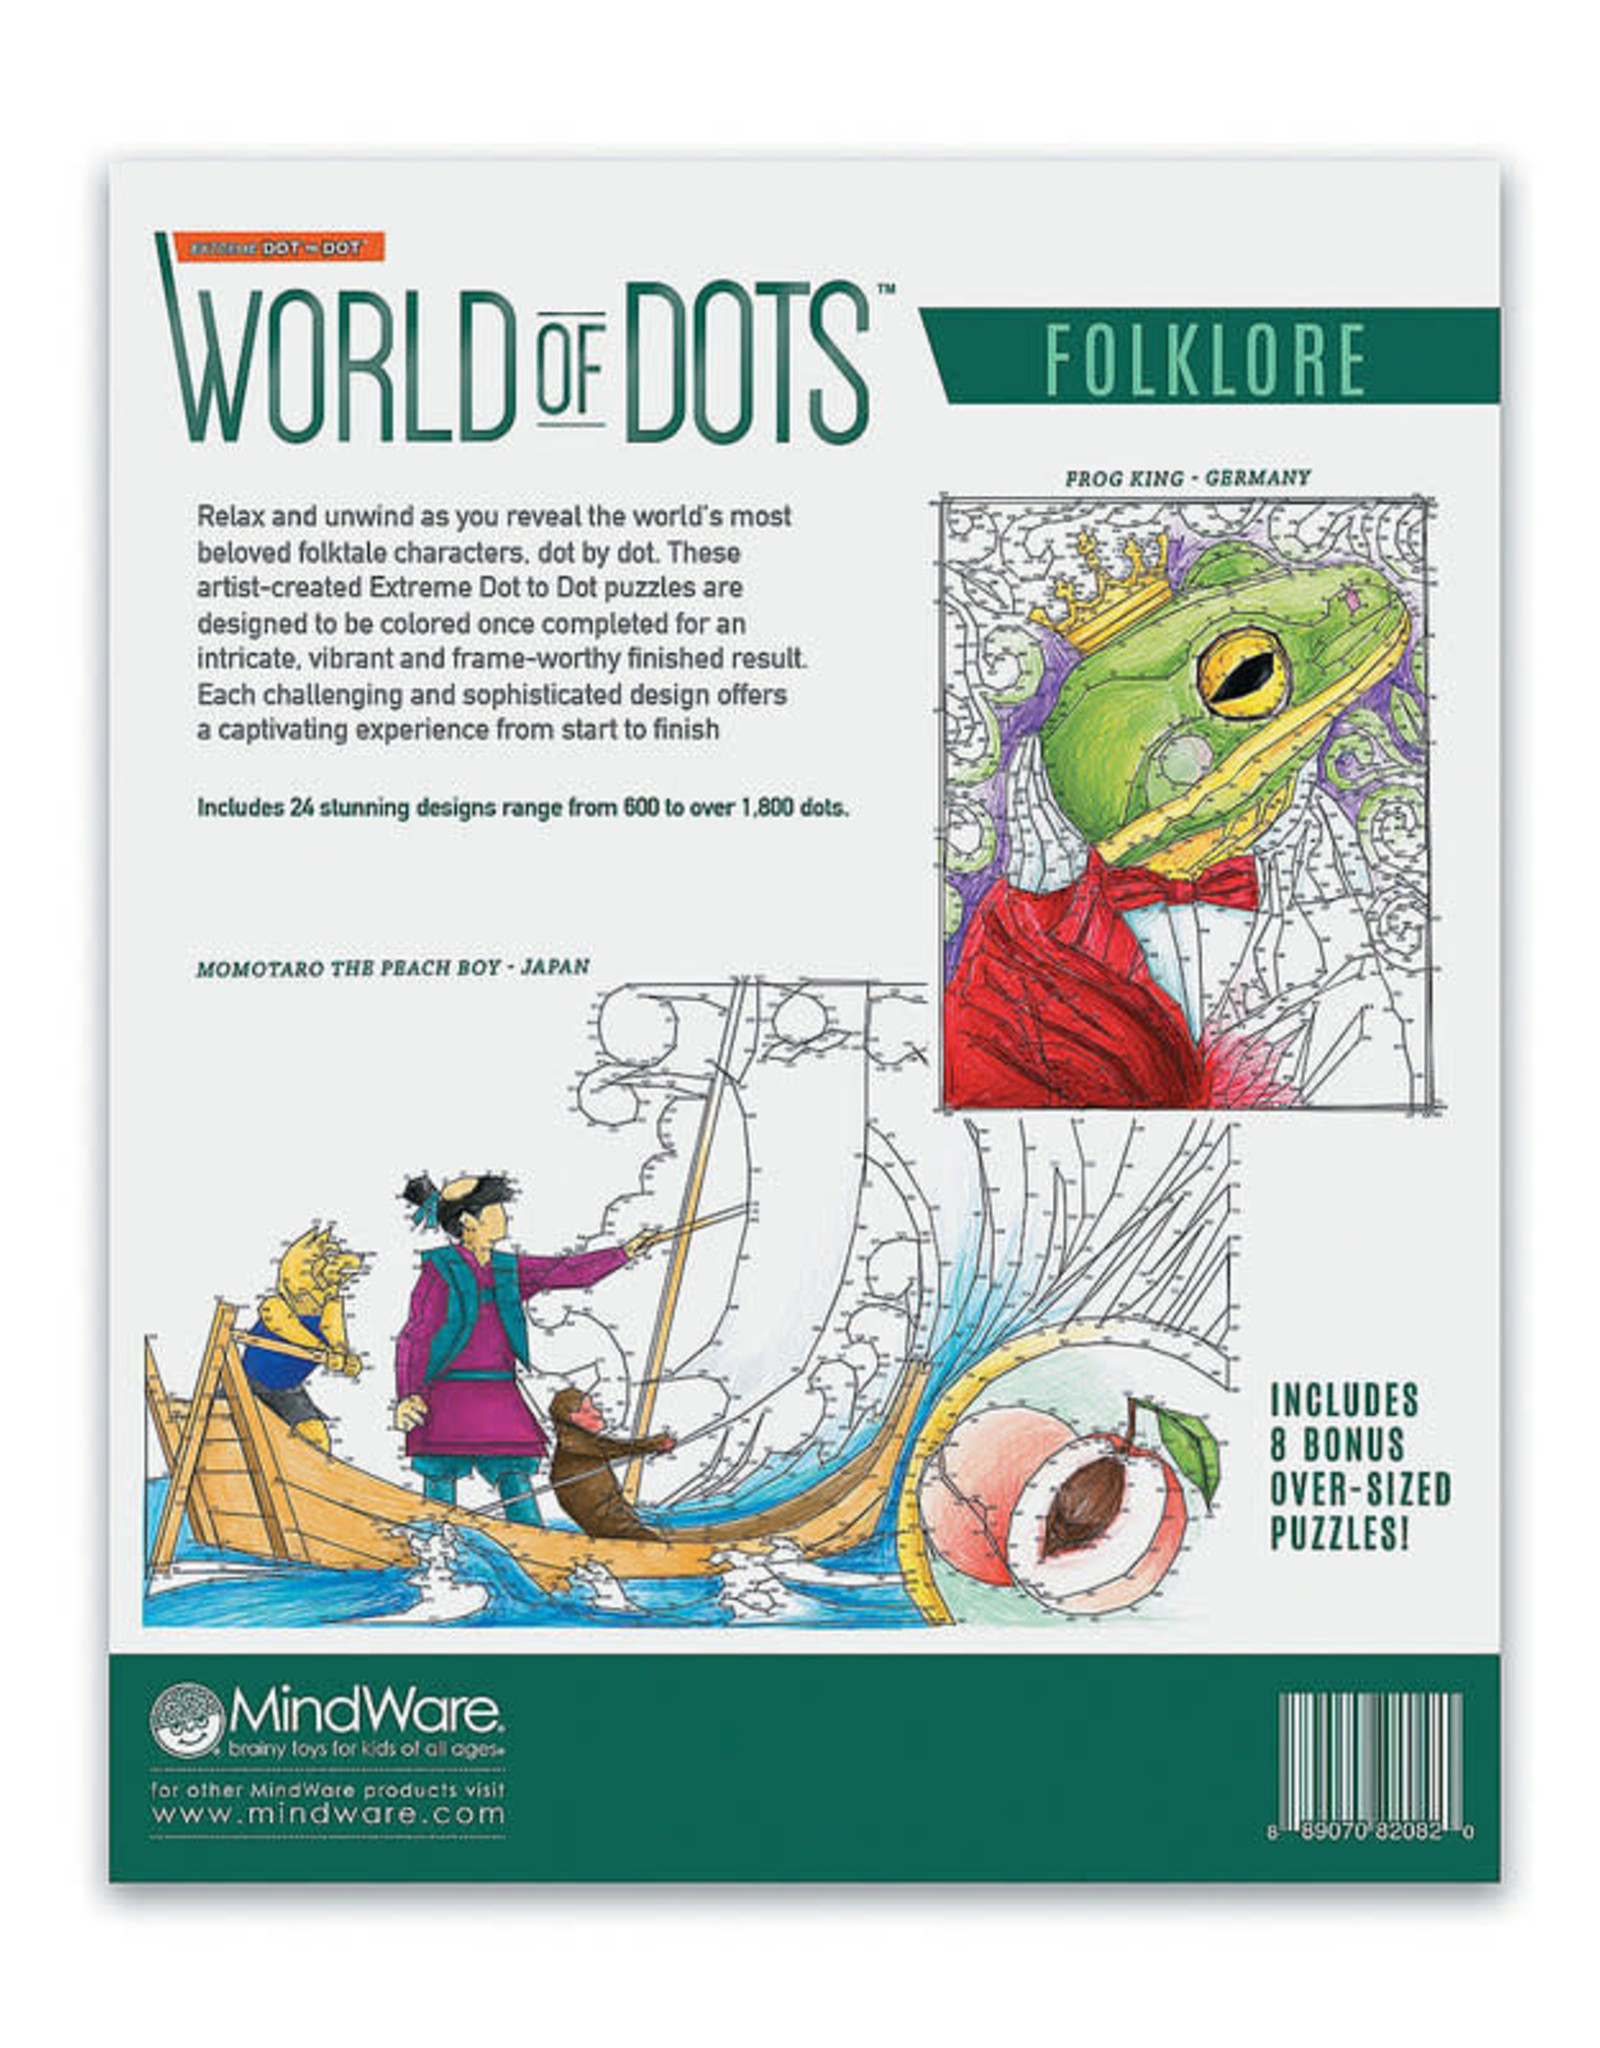 Outset media World of Dots Folklore